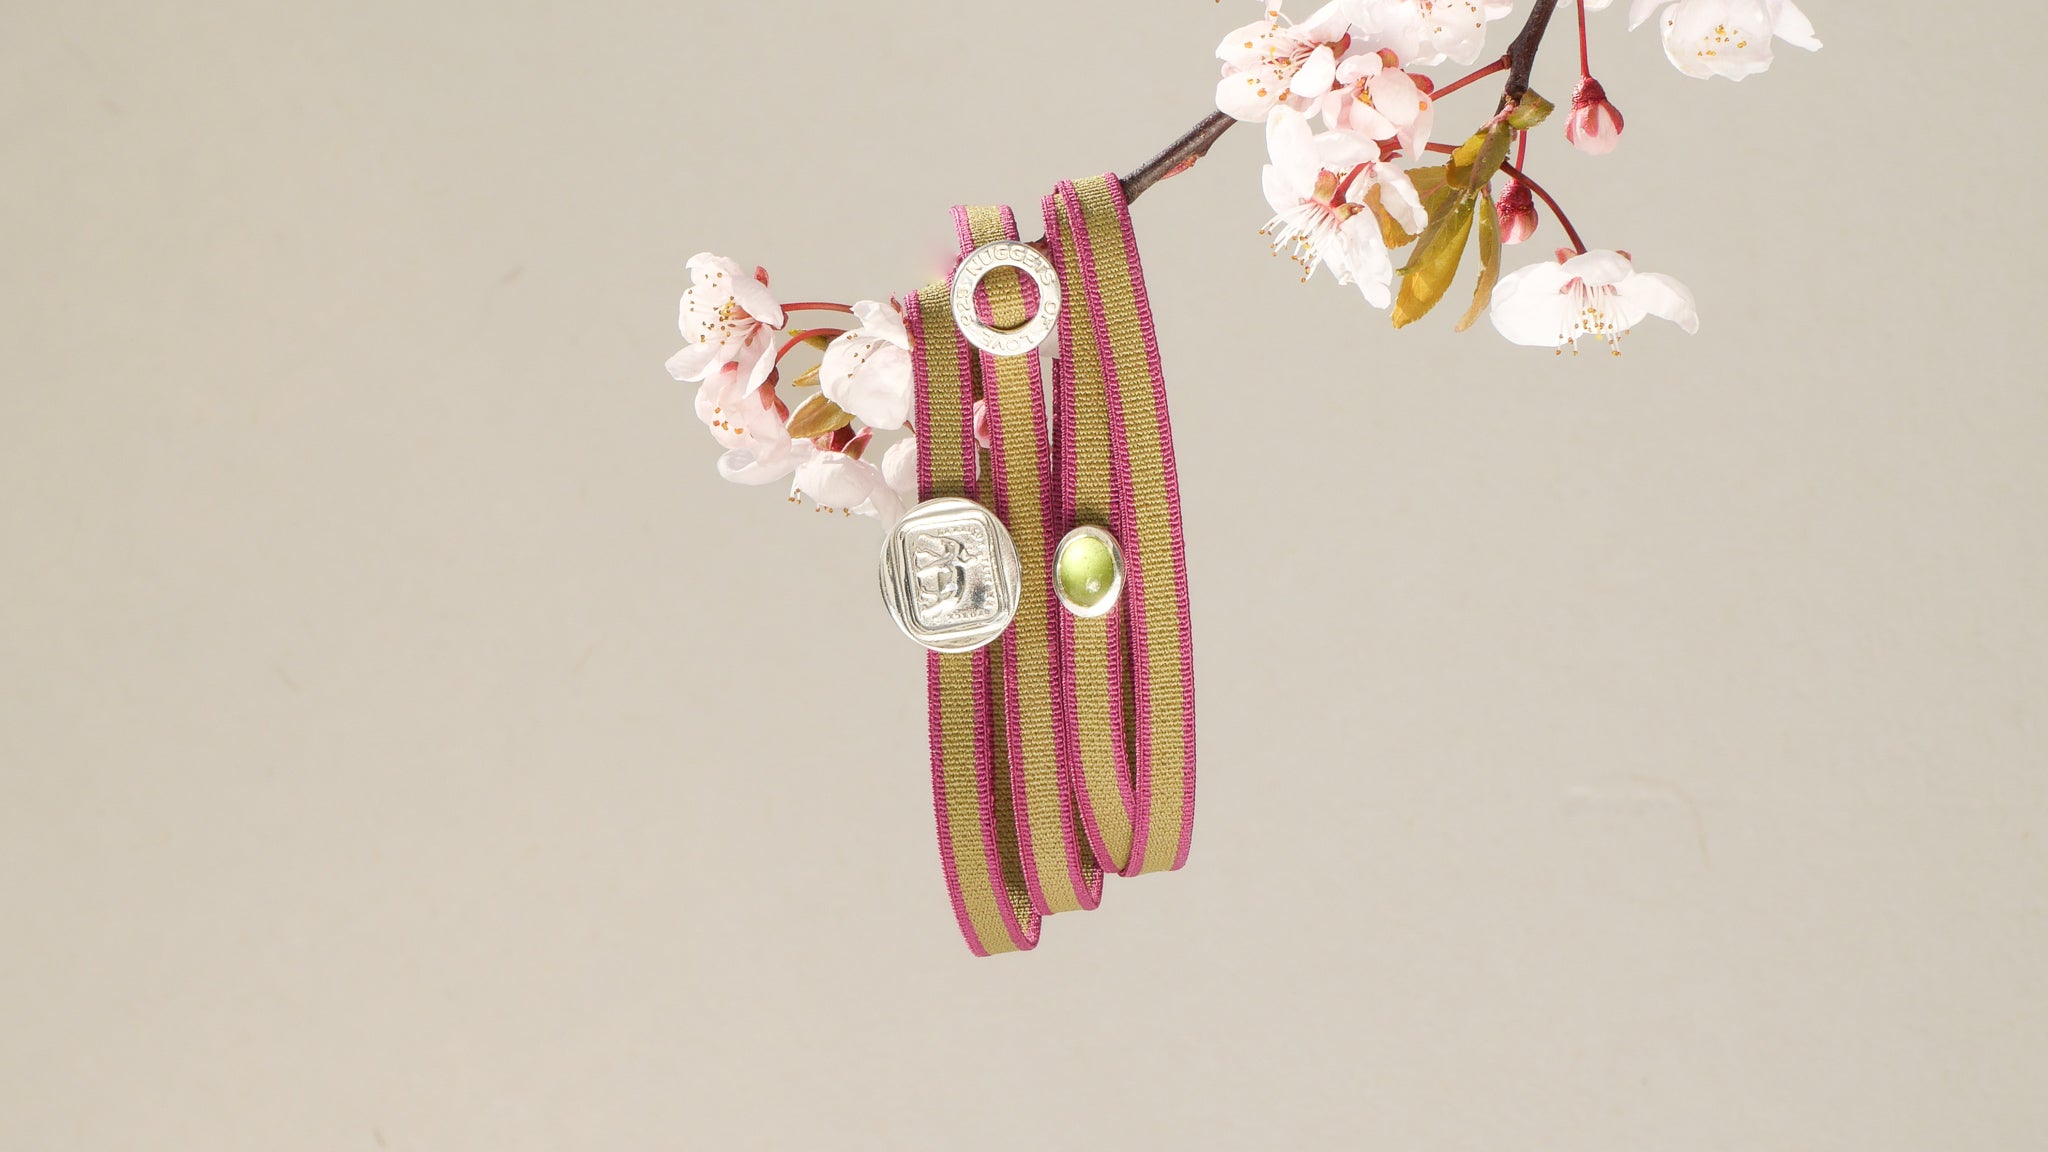 Kategorie True Nuggets of love Armbänder,. Armband Elefant in pink olive mit Edelstein Peridot - True Nuggets of love